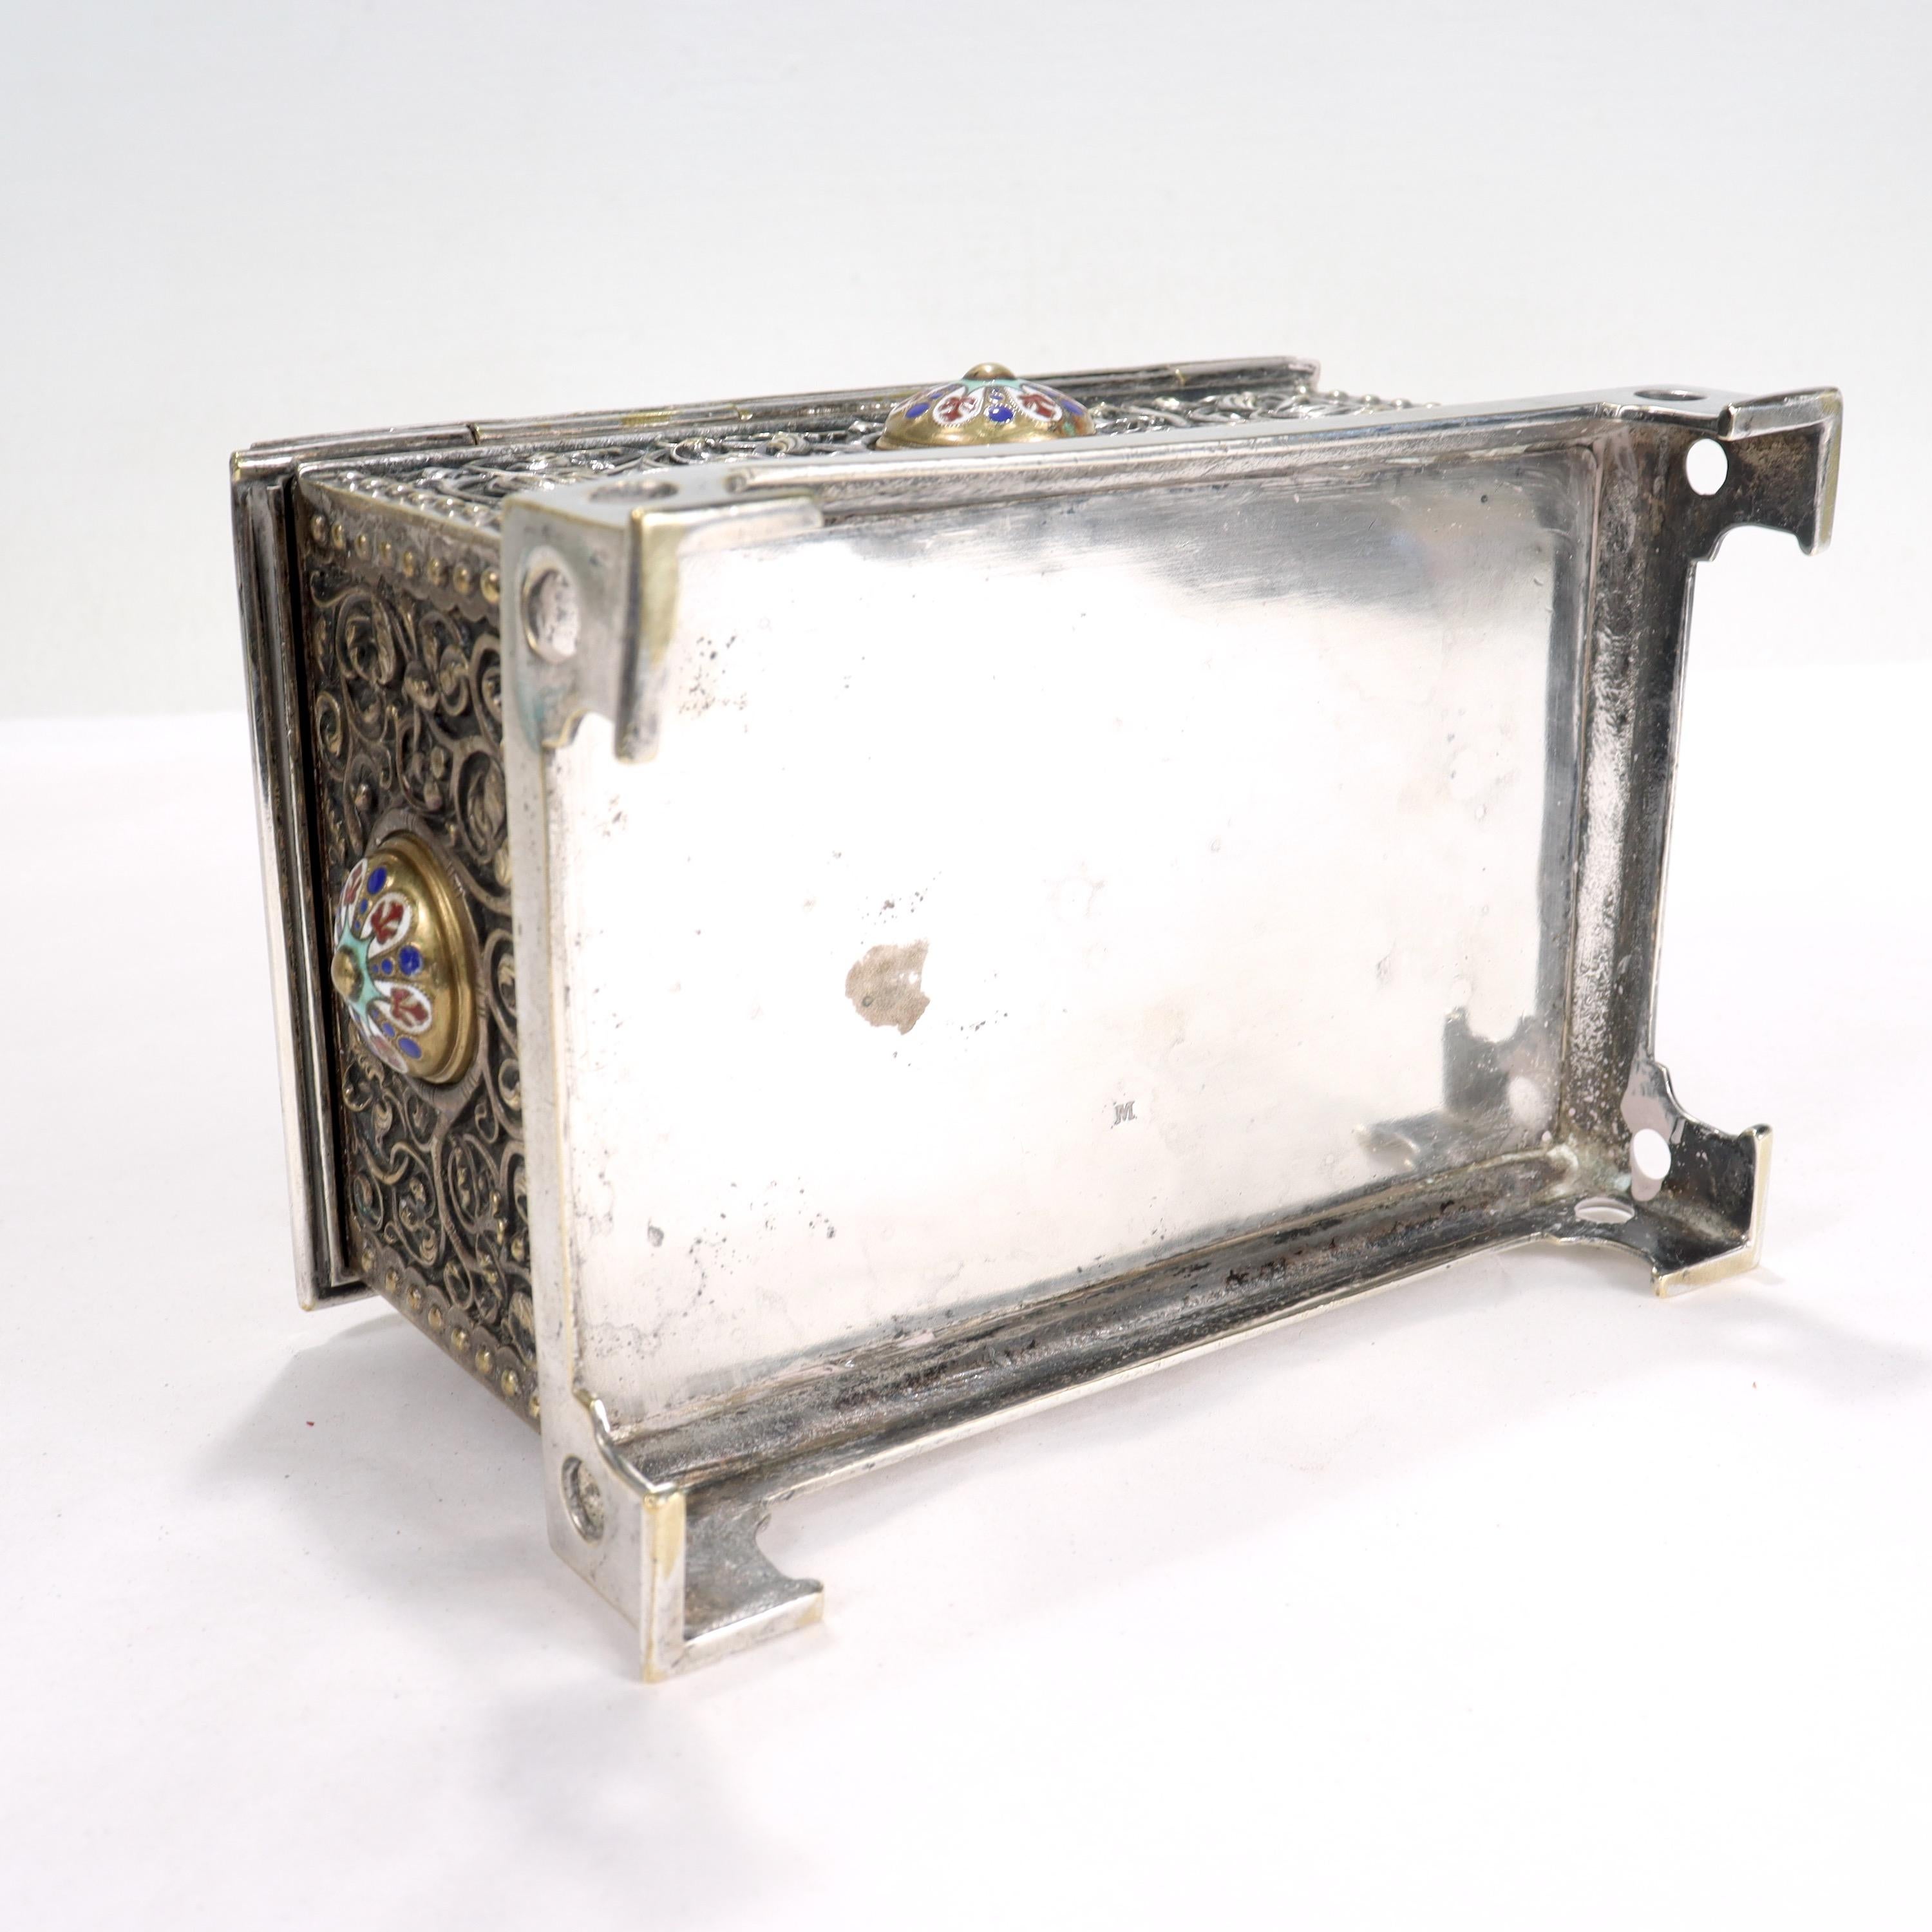 Antique Silver Plated & Enameled Table Box or Casket in the Russian Taste For Sale 7